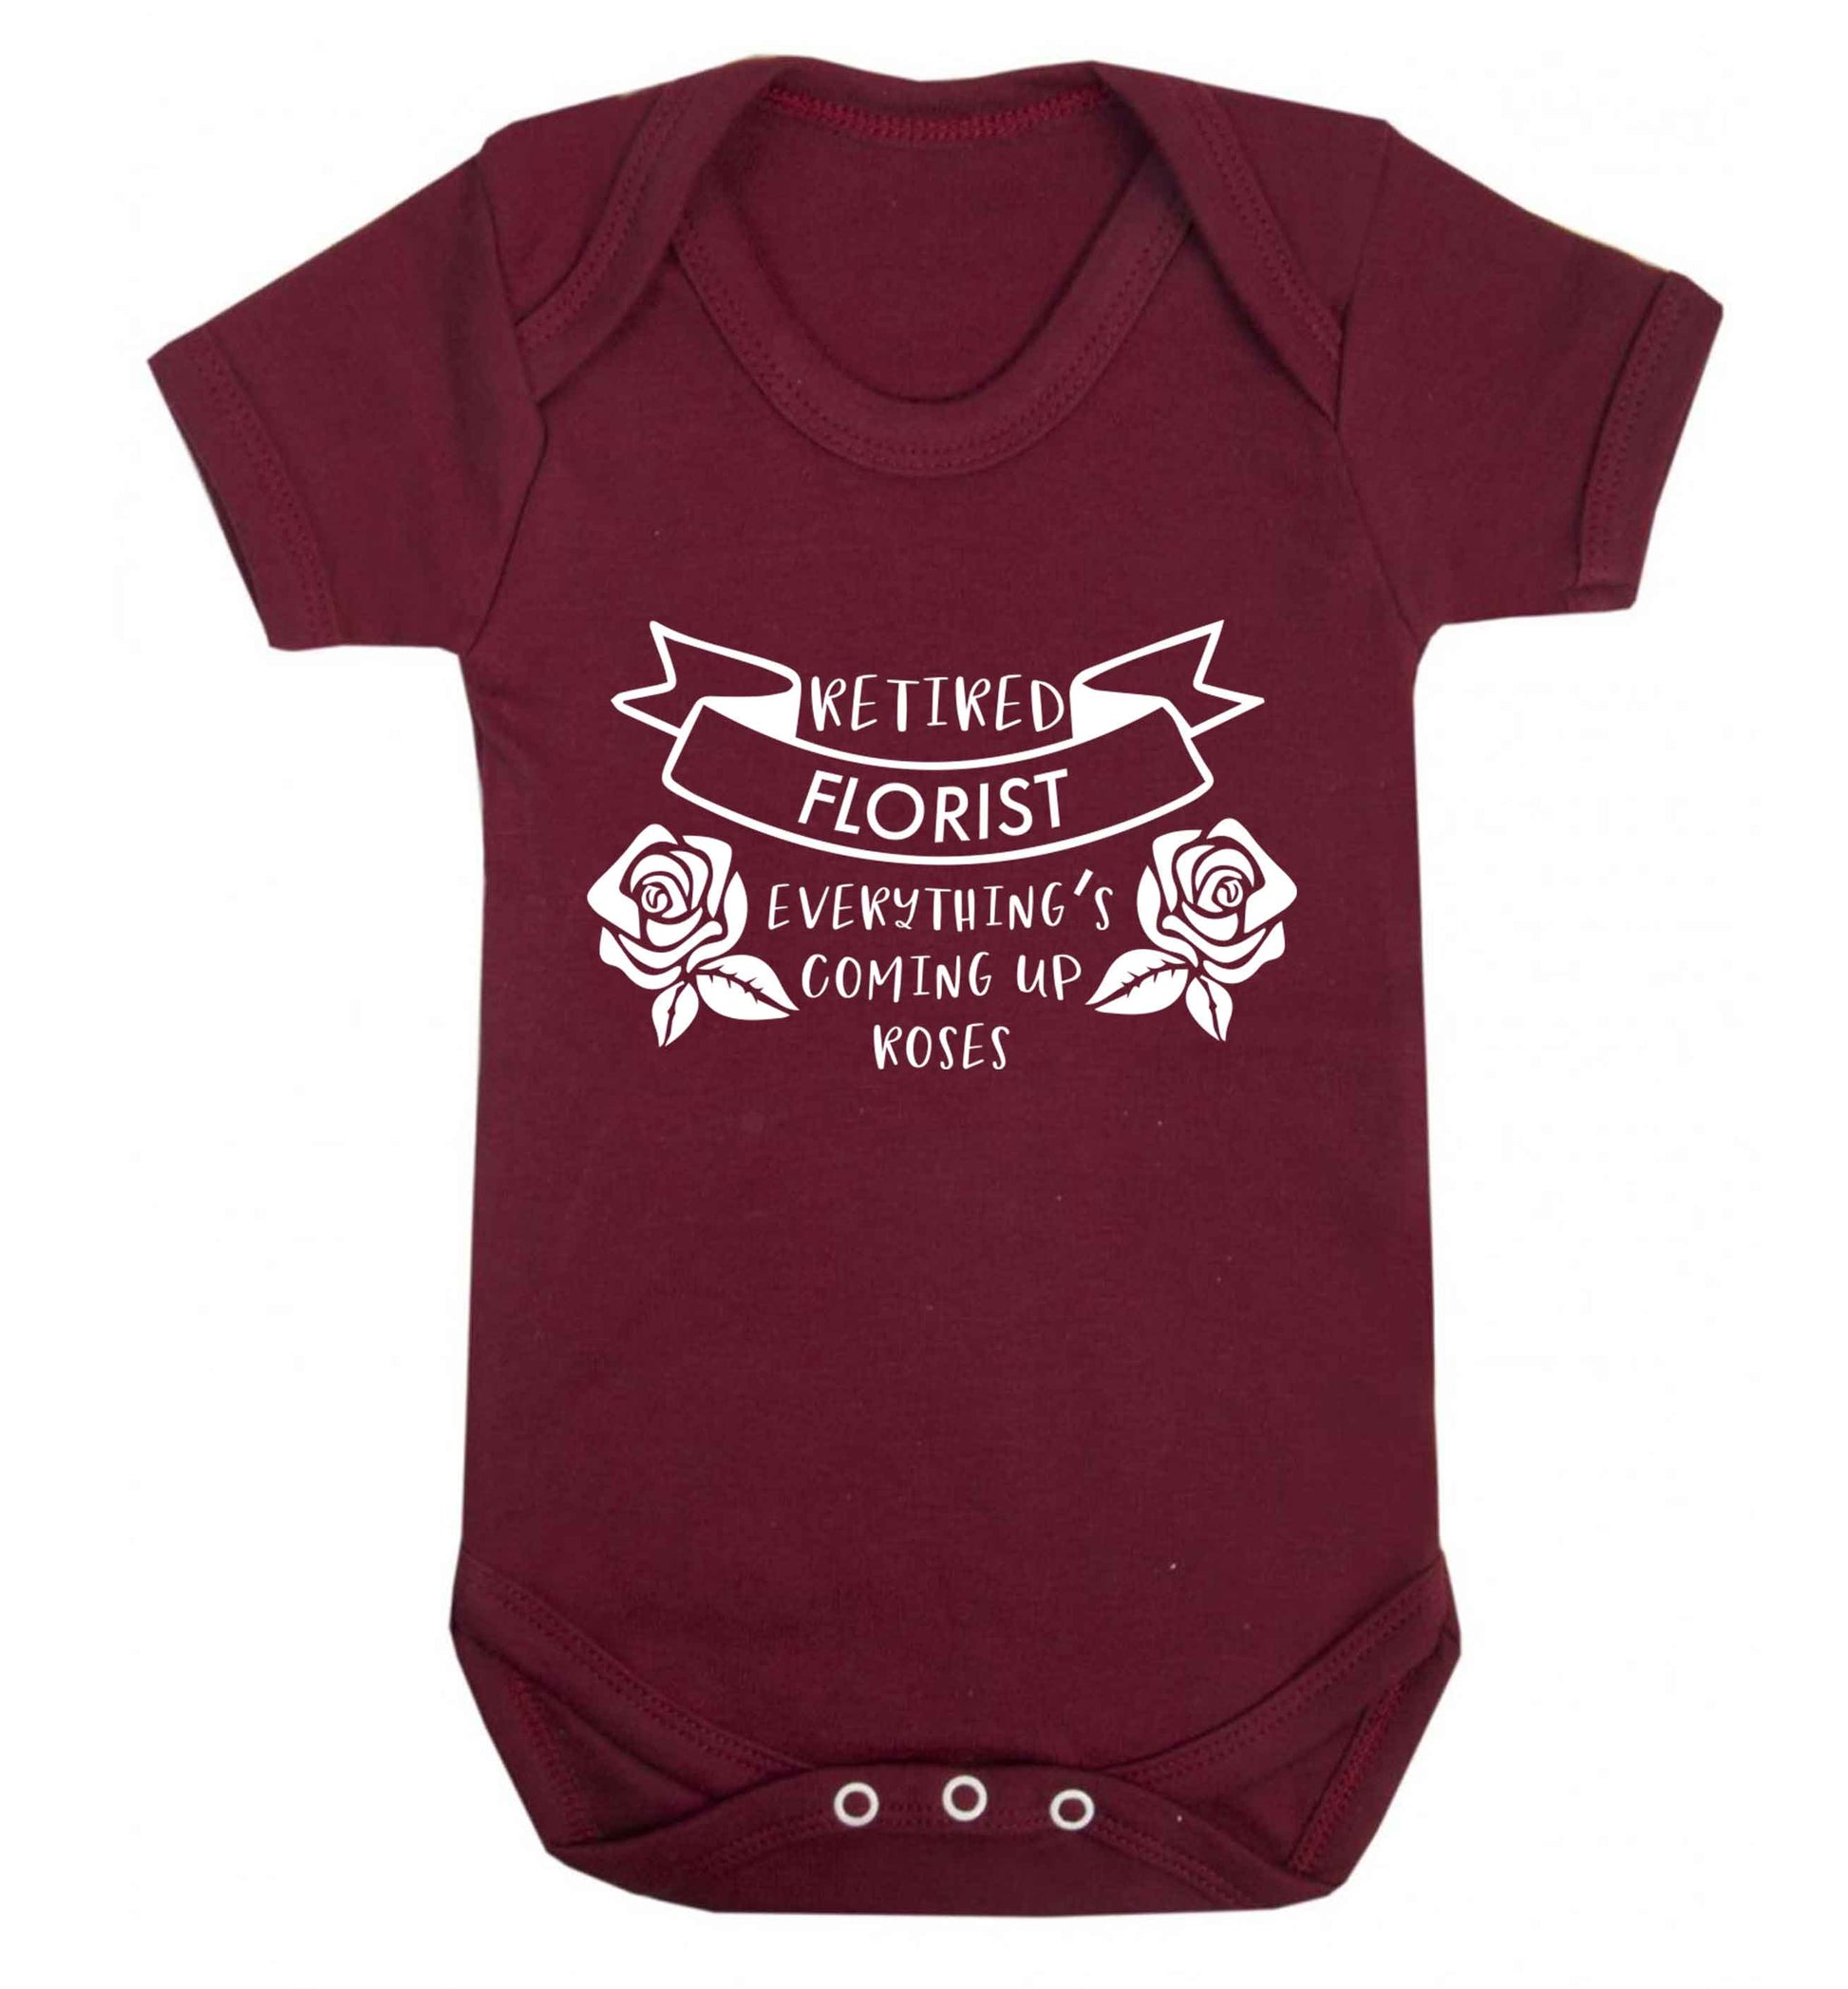 Retired florist everything's coming up roses Baby Vest maroon 18-24 months